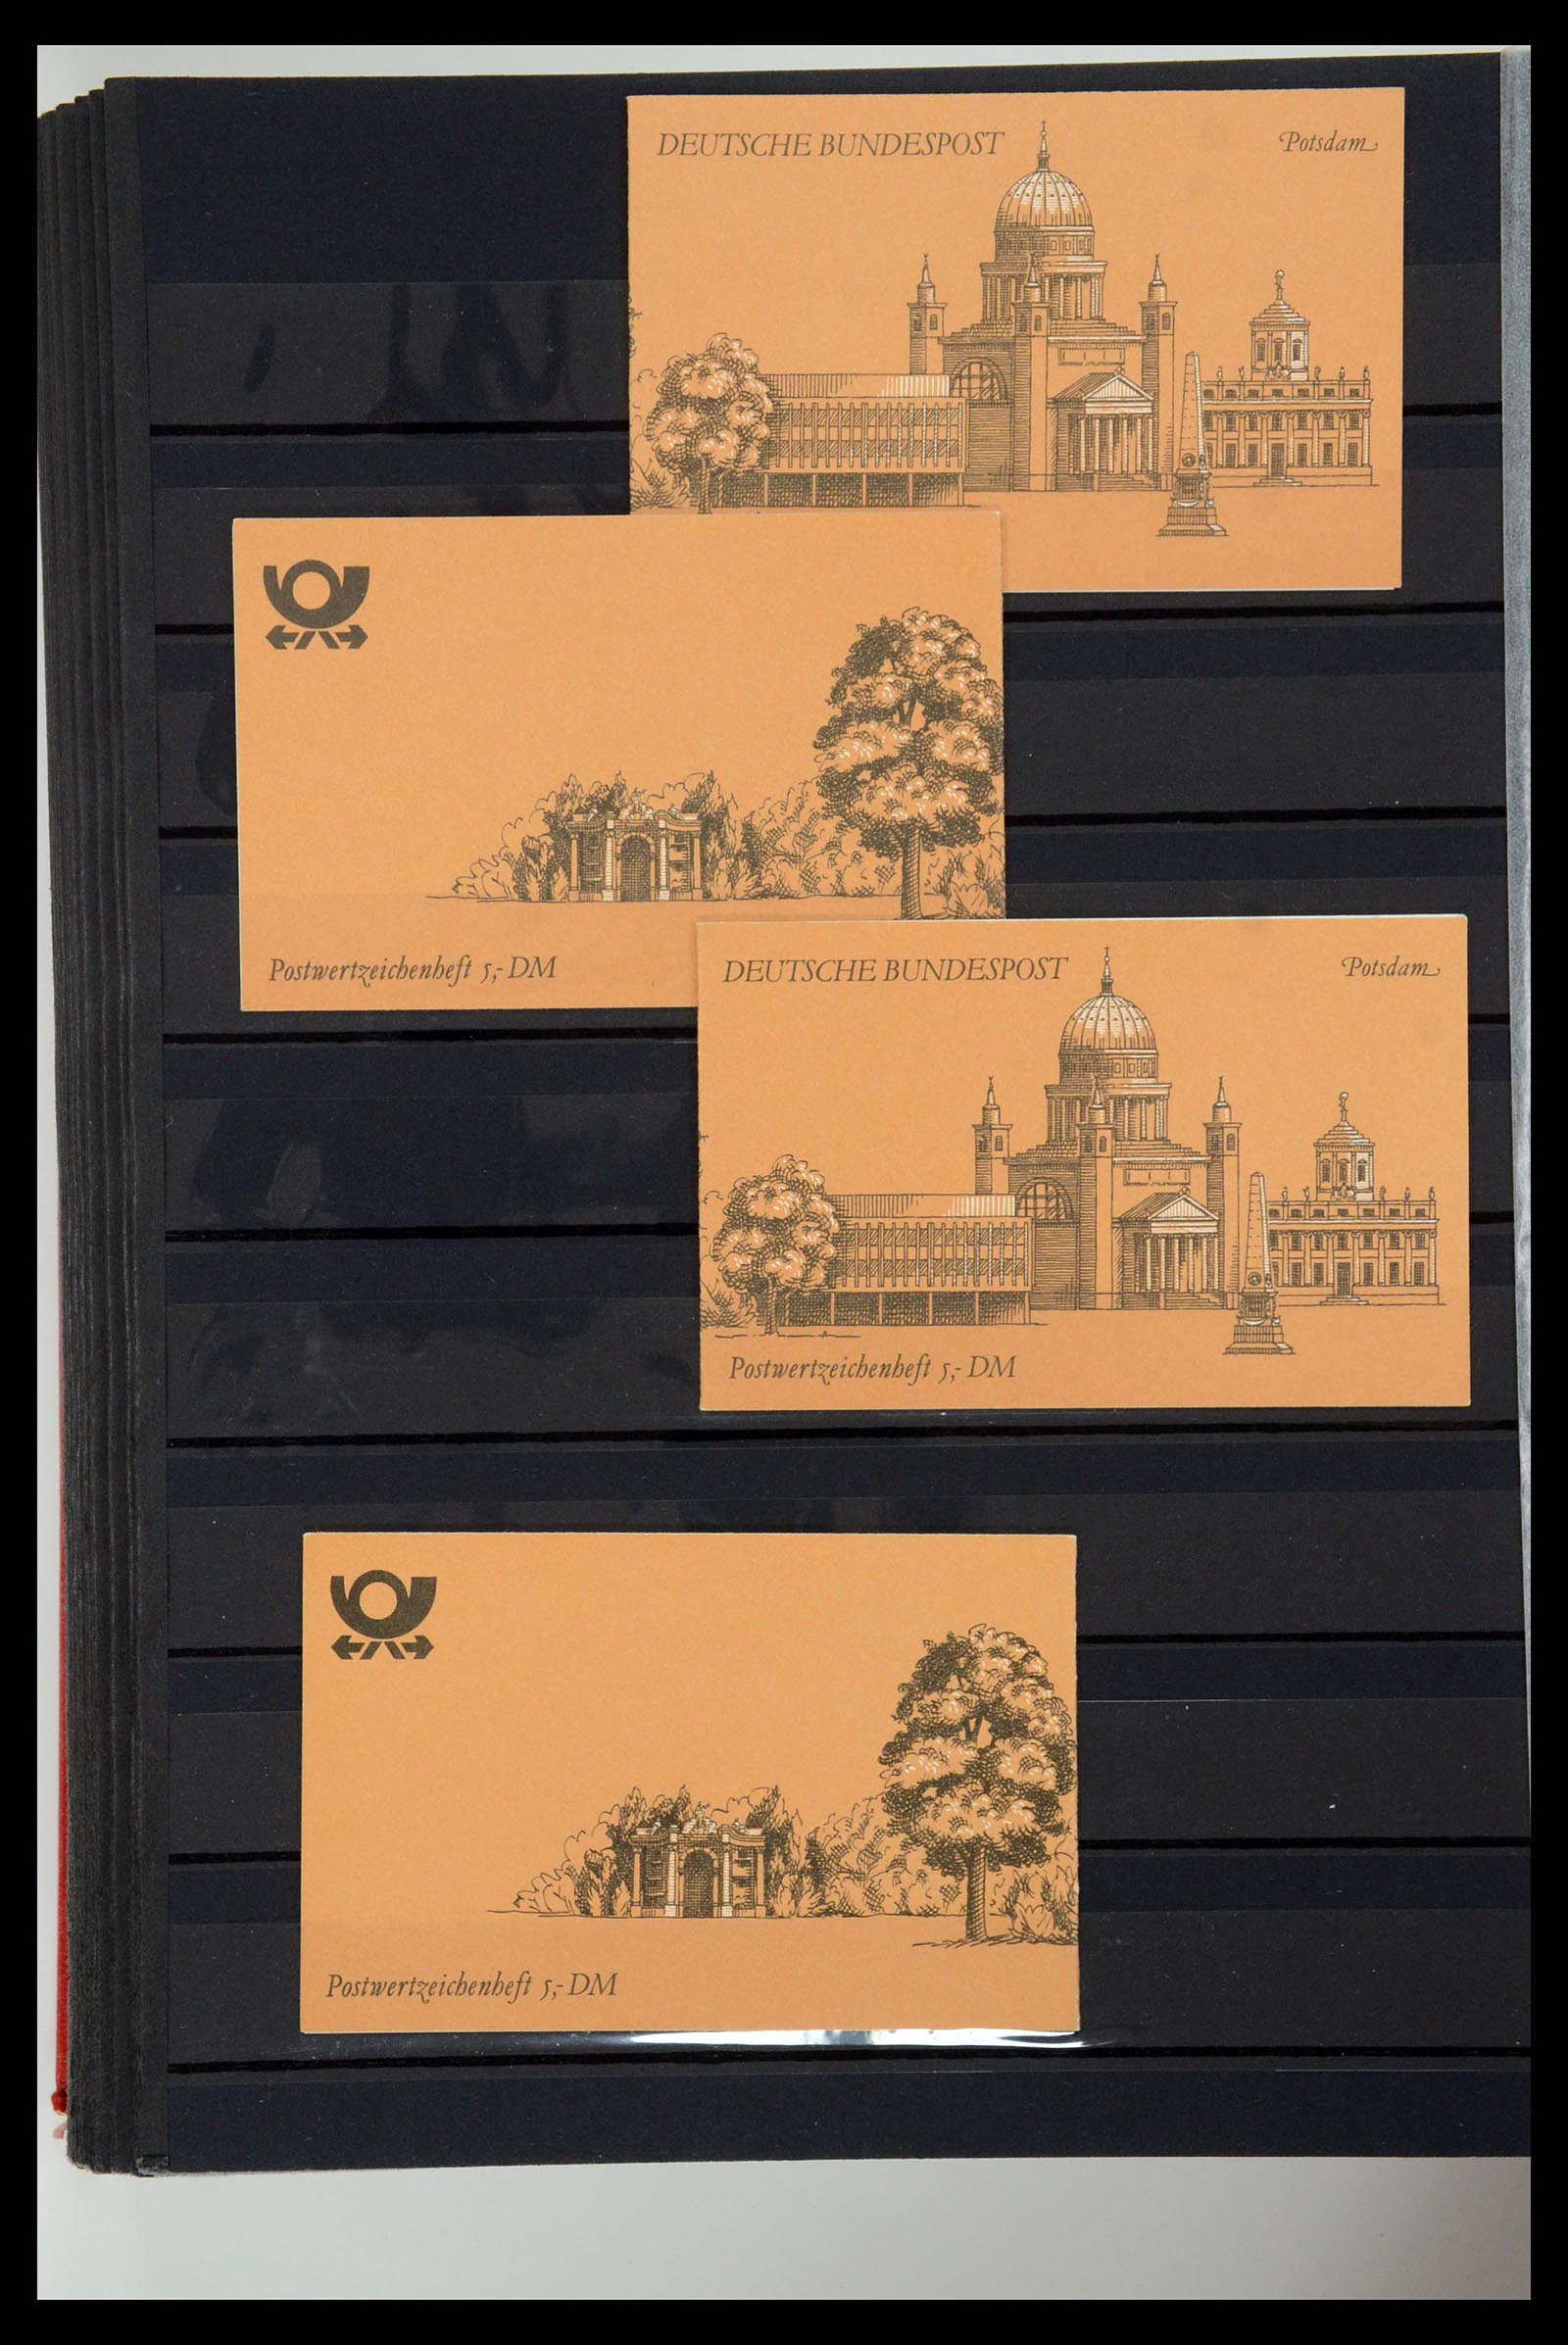 35356 058 - Stamp Collection 35356 Bundespost stamp booklets and combinations 1951-2